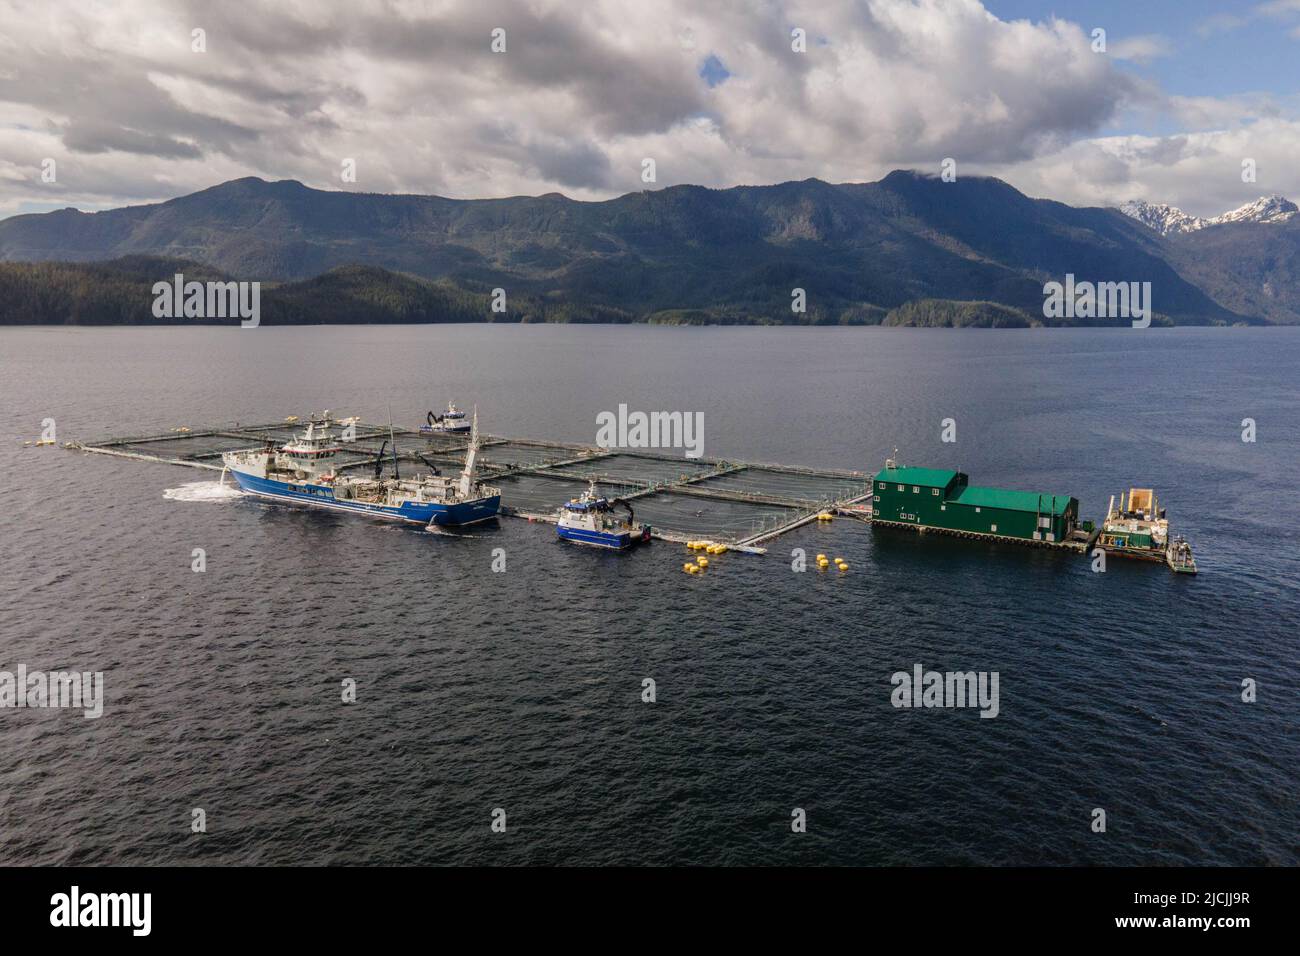 Salmon farm with a delice ship doing sea louse treatment in Clayoquot Sound, British Columbia. Stock Photo